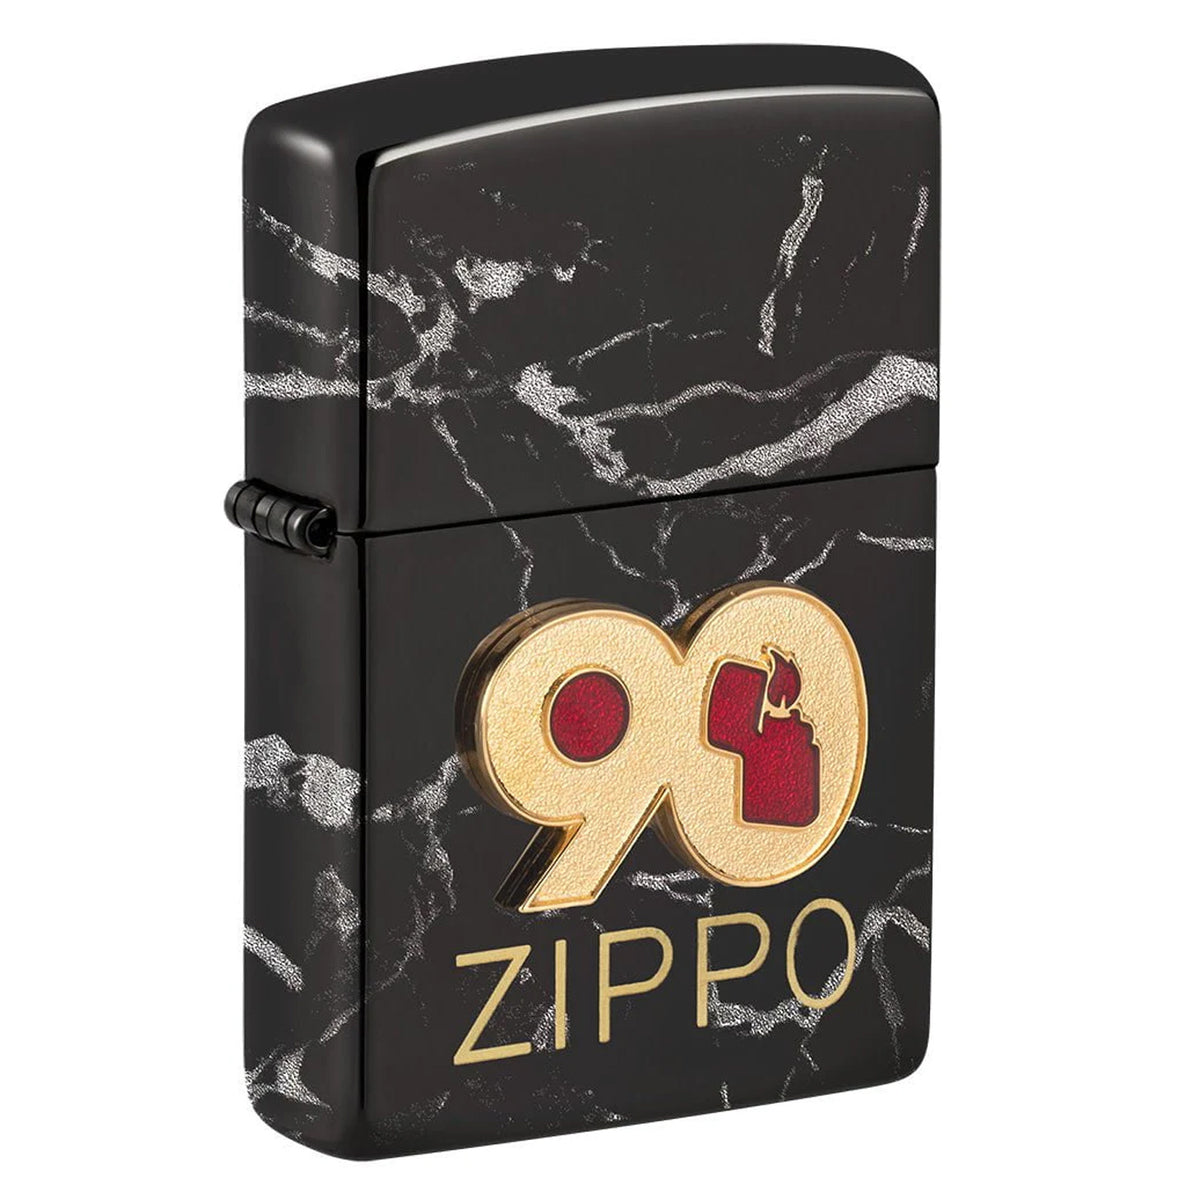 zippo 90th anniversary limited edition - タバコグッズ